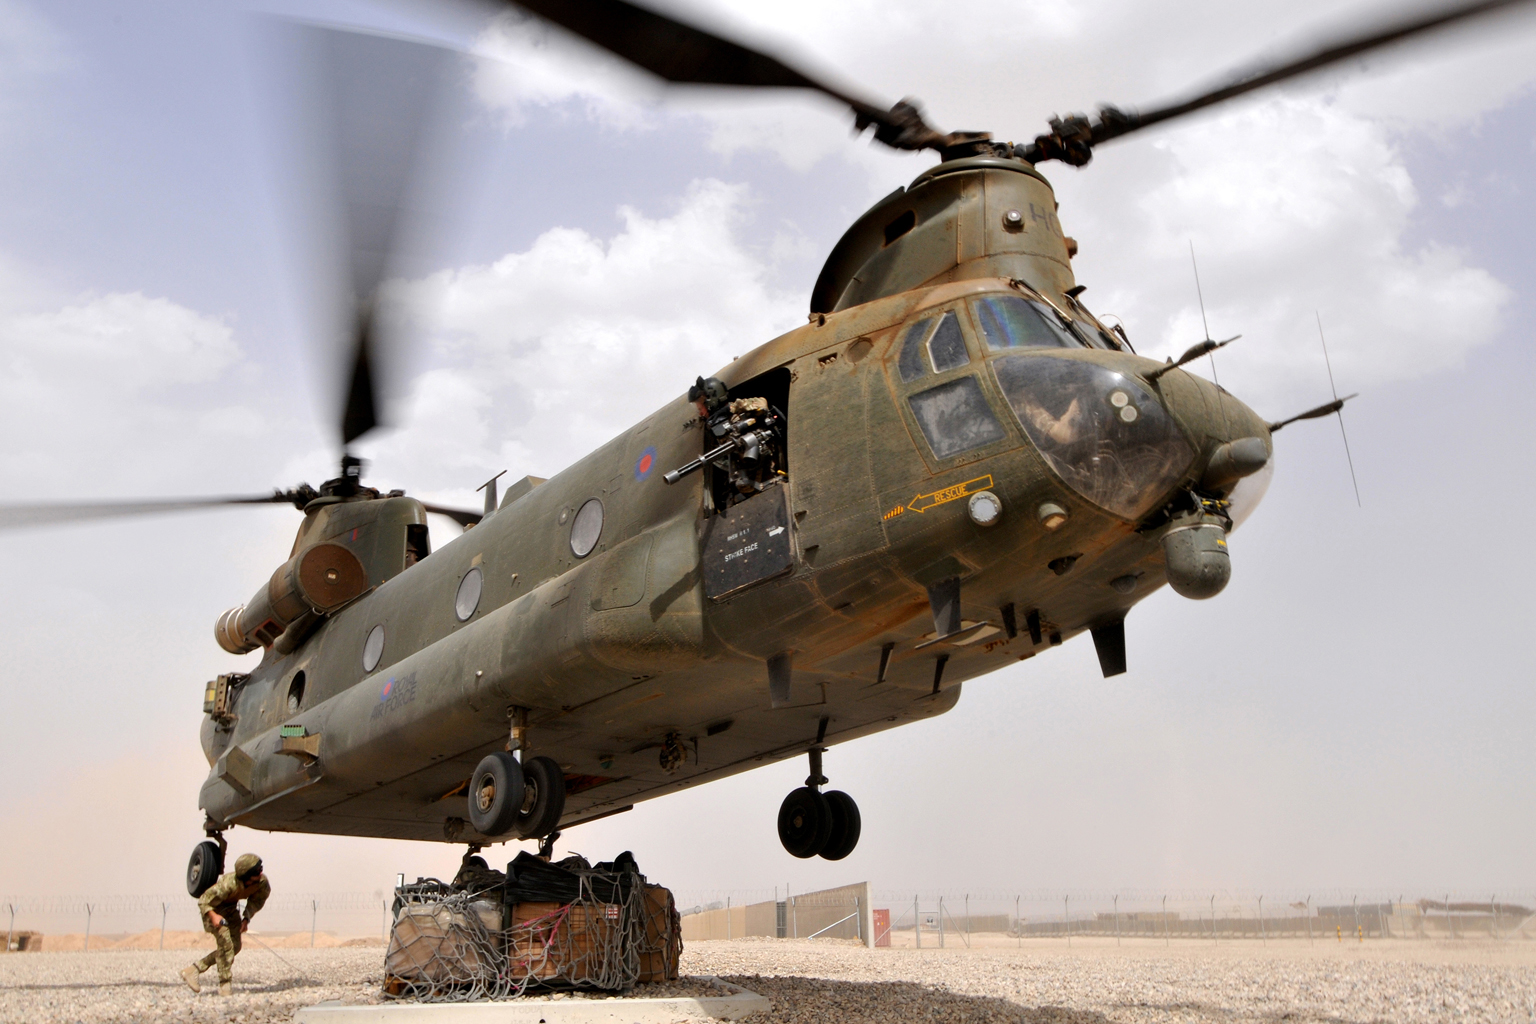 Chinook_Helicopter_Picks_Up_Supplies_to_Deliver_to_Frontline_Soldiers_in_Afghanistan_MOD_45153239.jpg